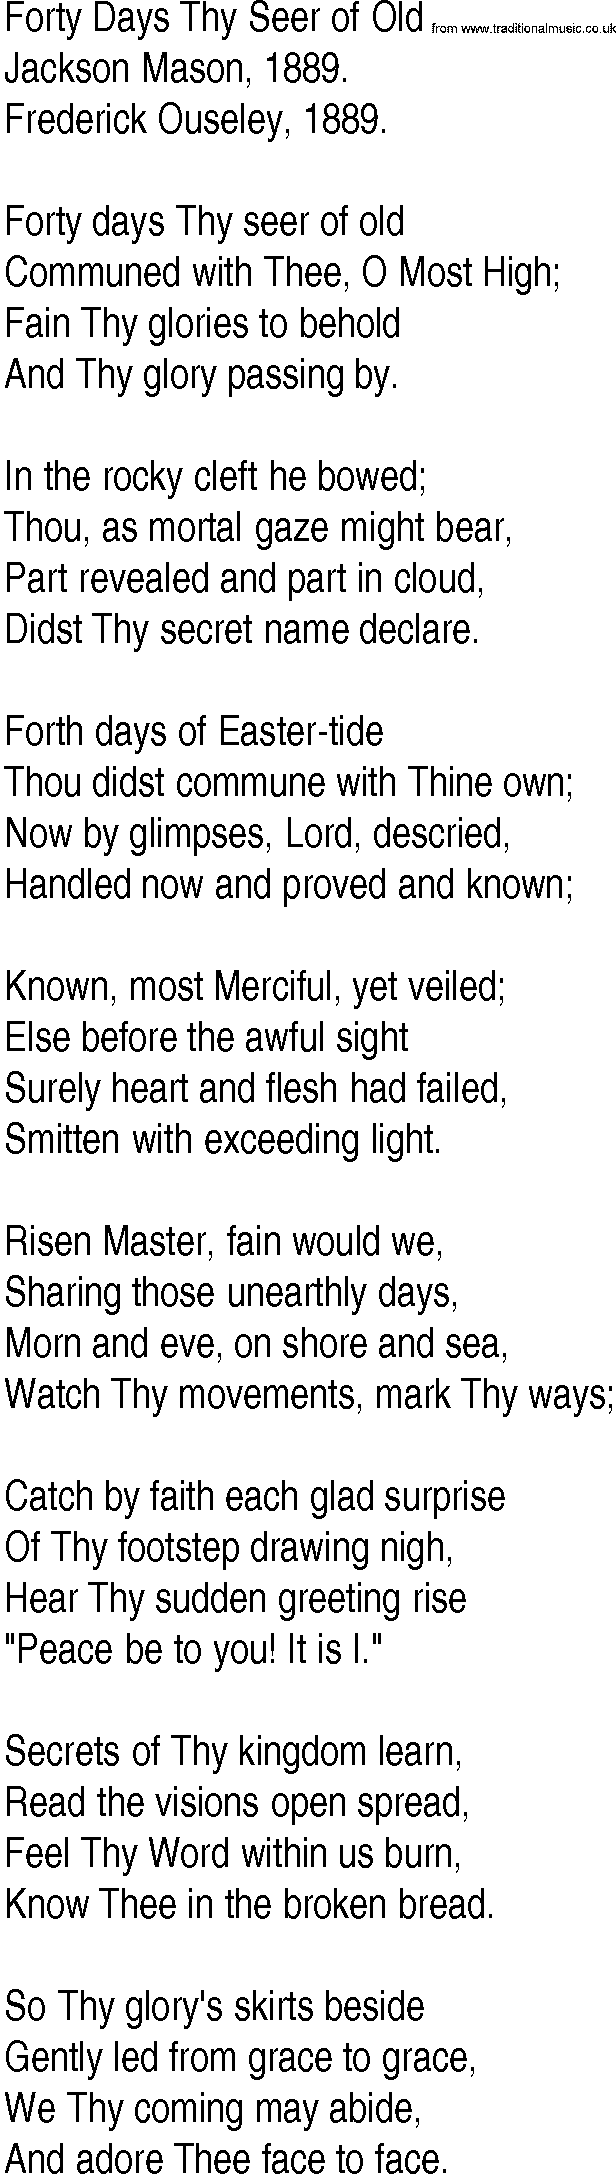 Hymn and Gospel Song: Forty Days Thy Seer of Old by Jackson Mason lyrics